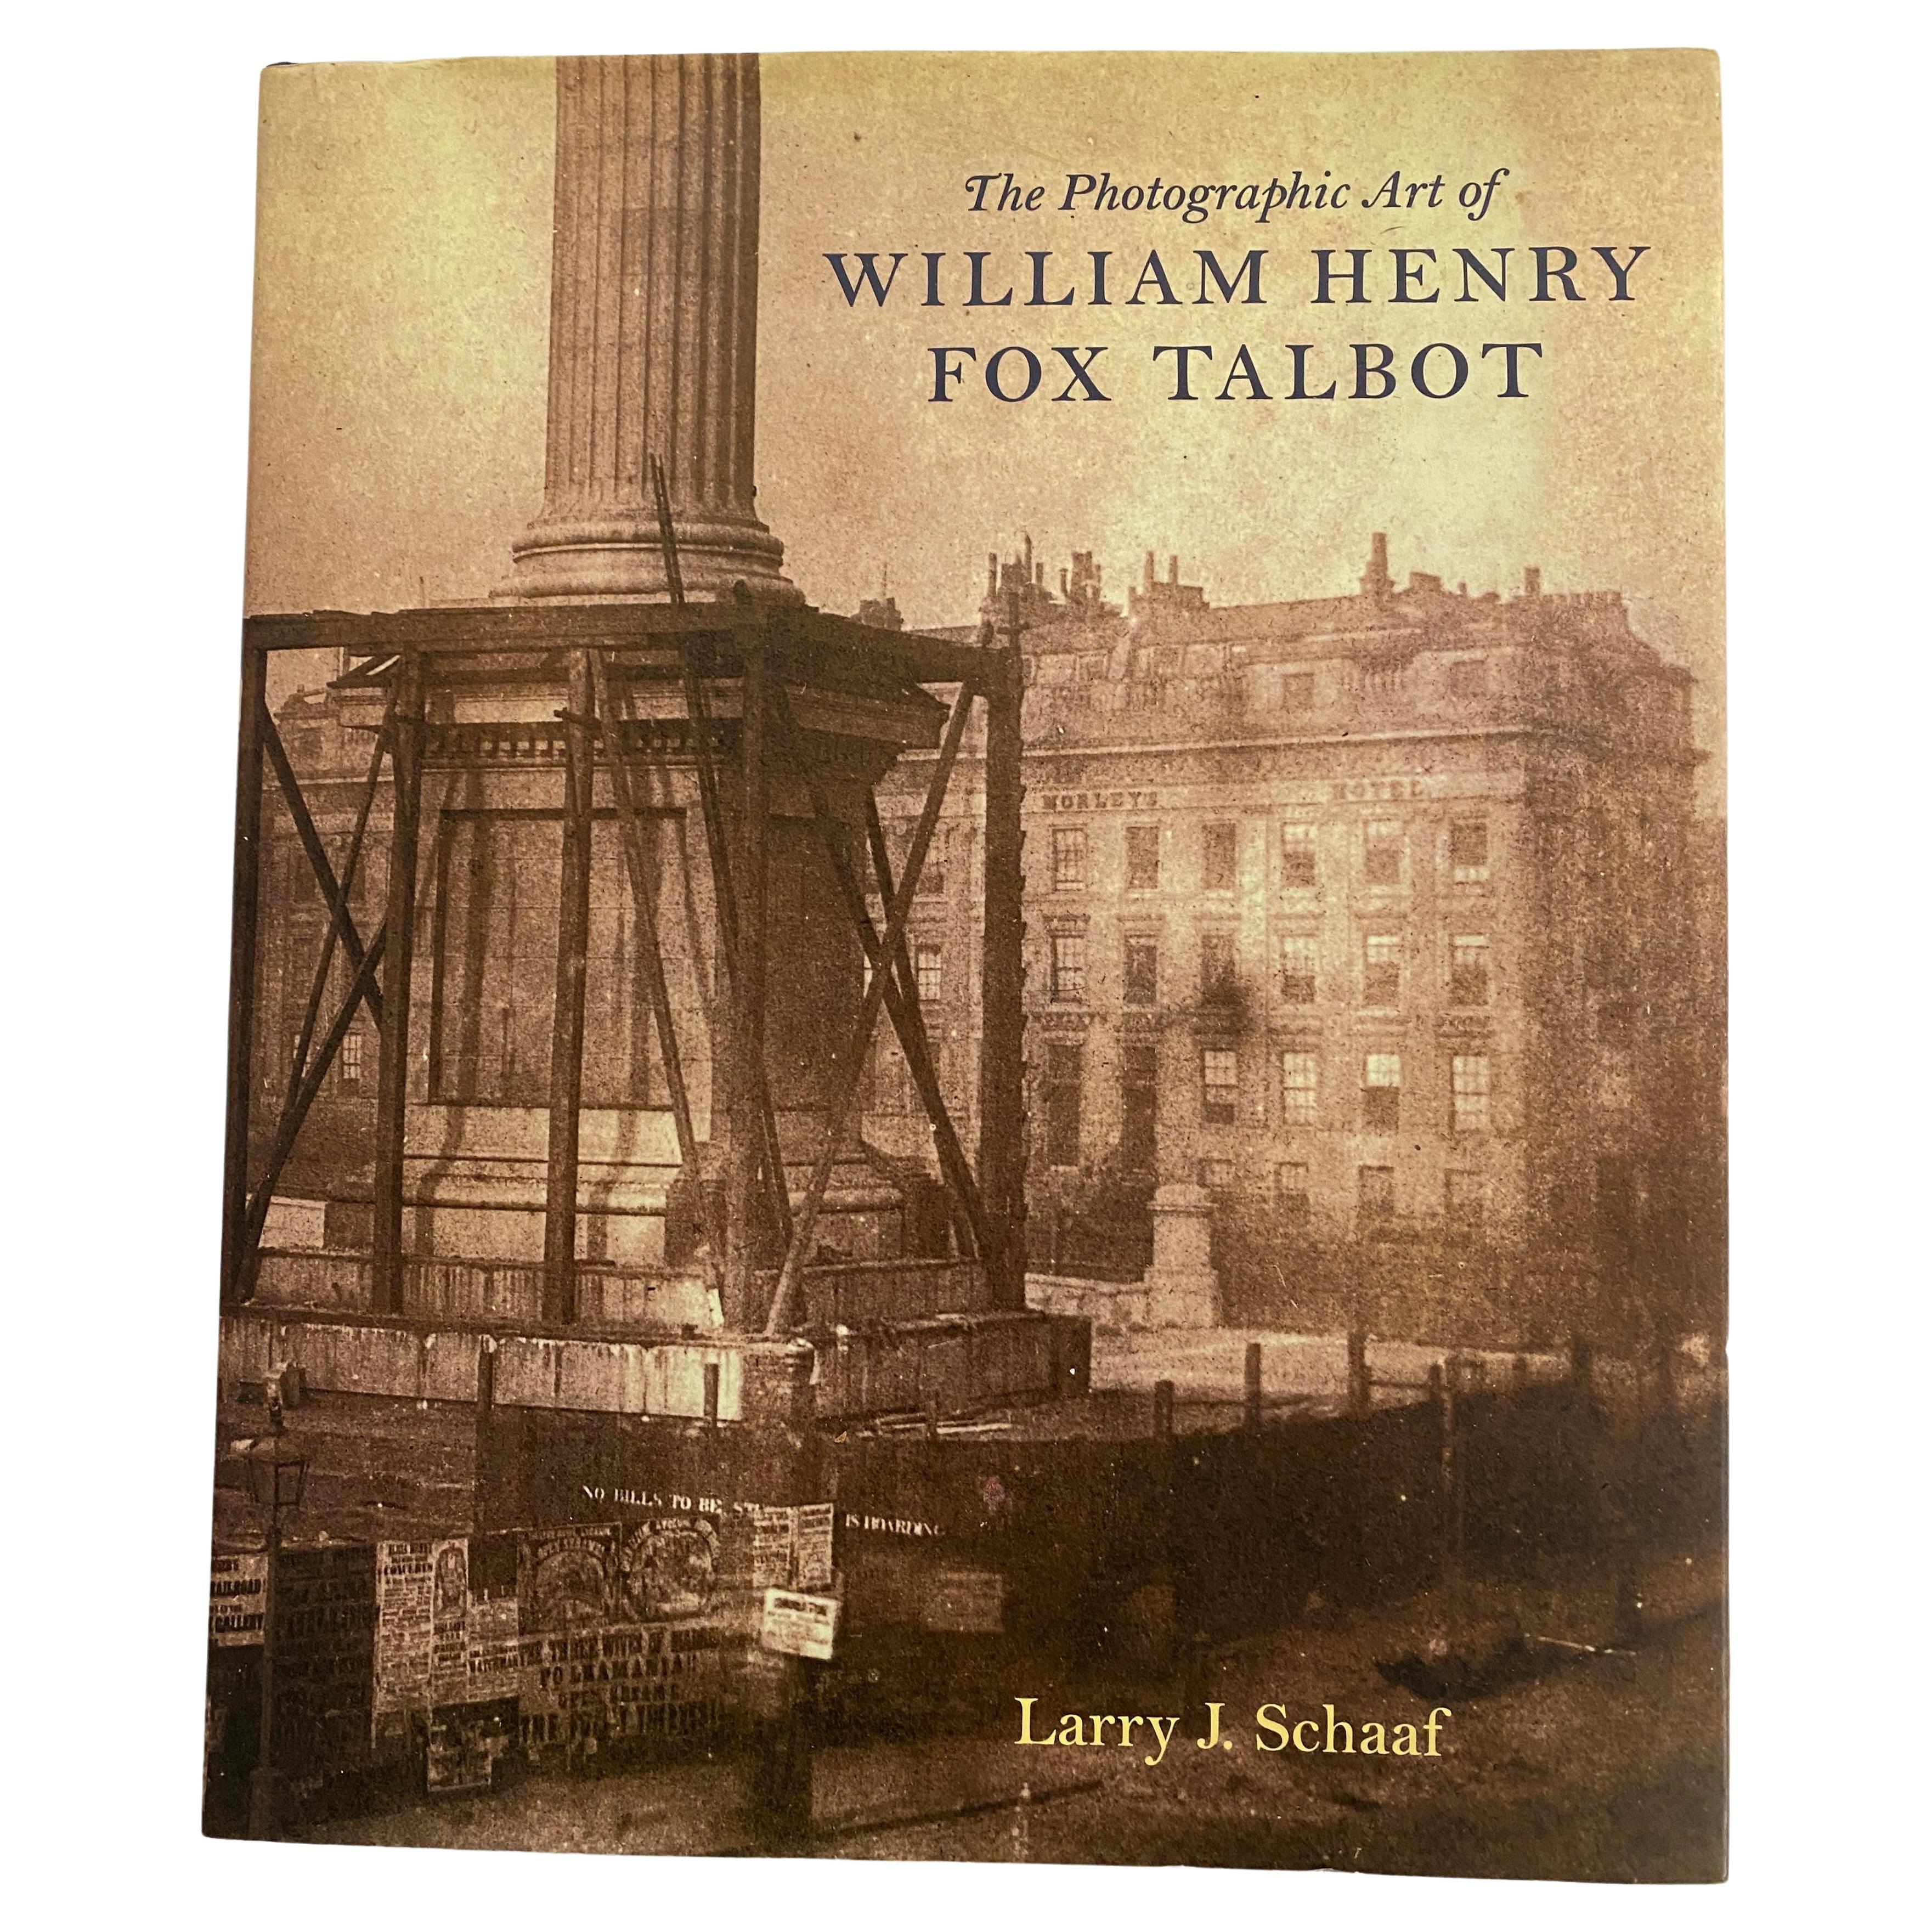 The Photographic Art of William Henry Fox Talbot by Larry J. Schaaf (Book) For Sale